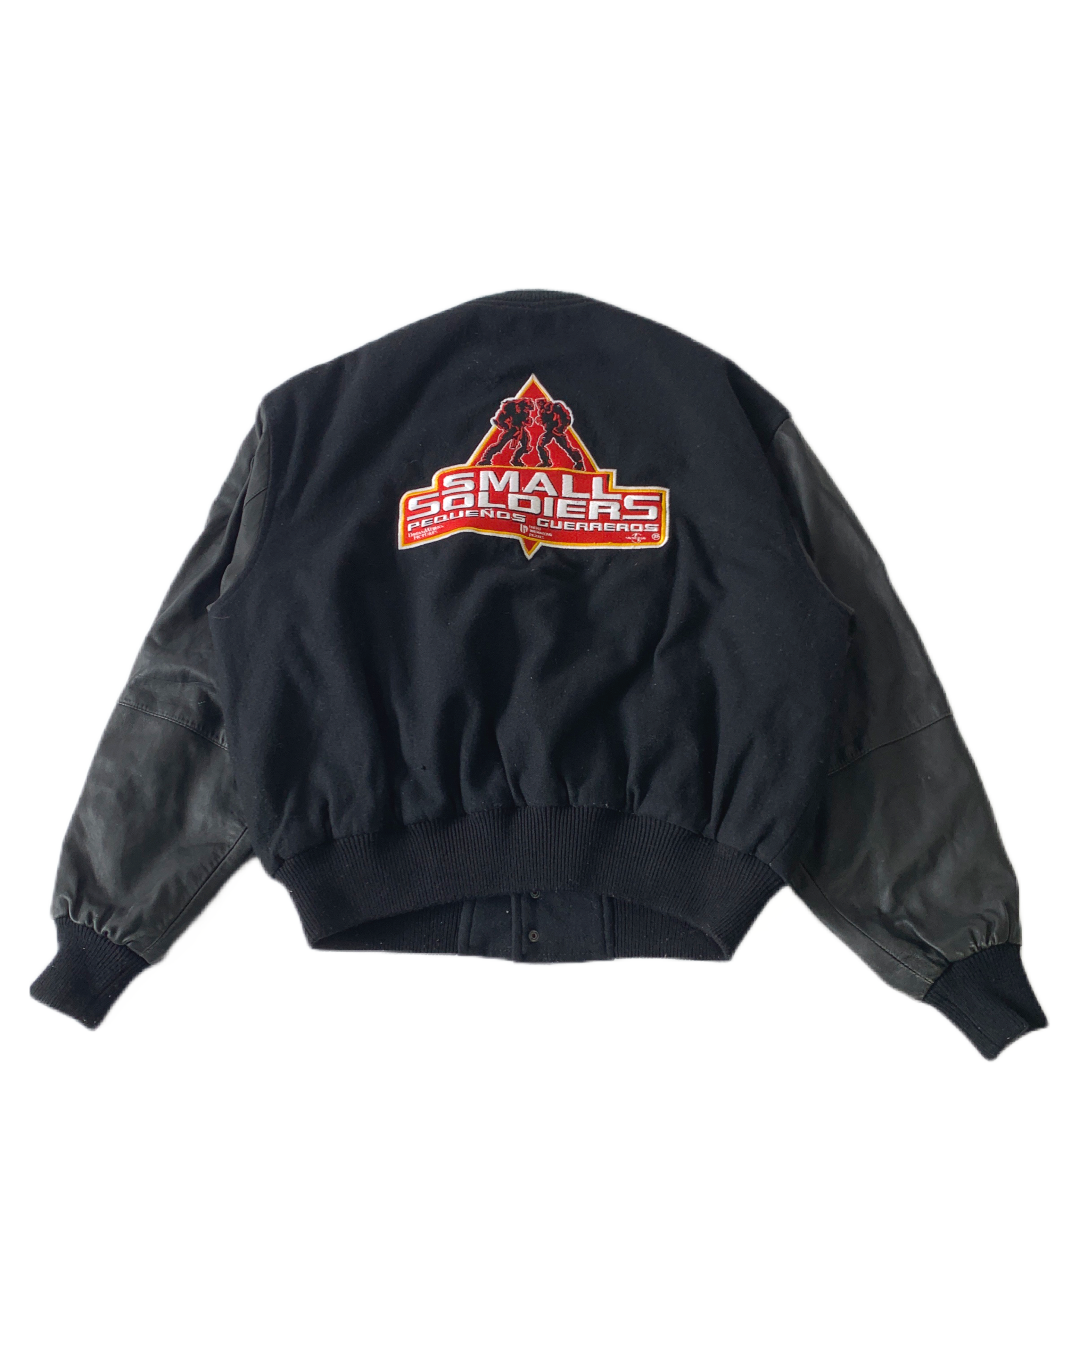 Small Soldiers Movie Promotional Vintage Bomber Leather Jacket - L